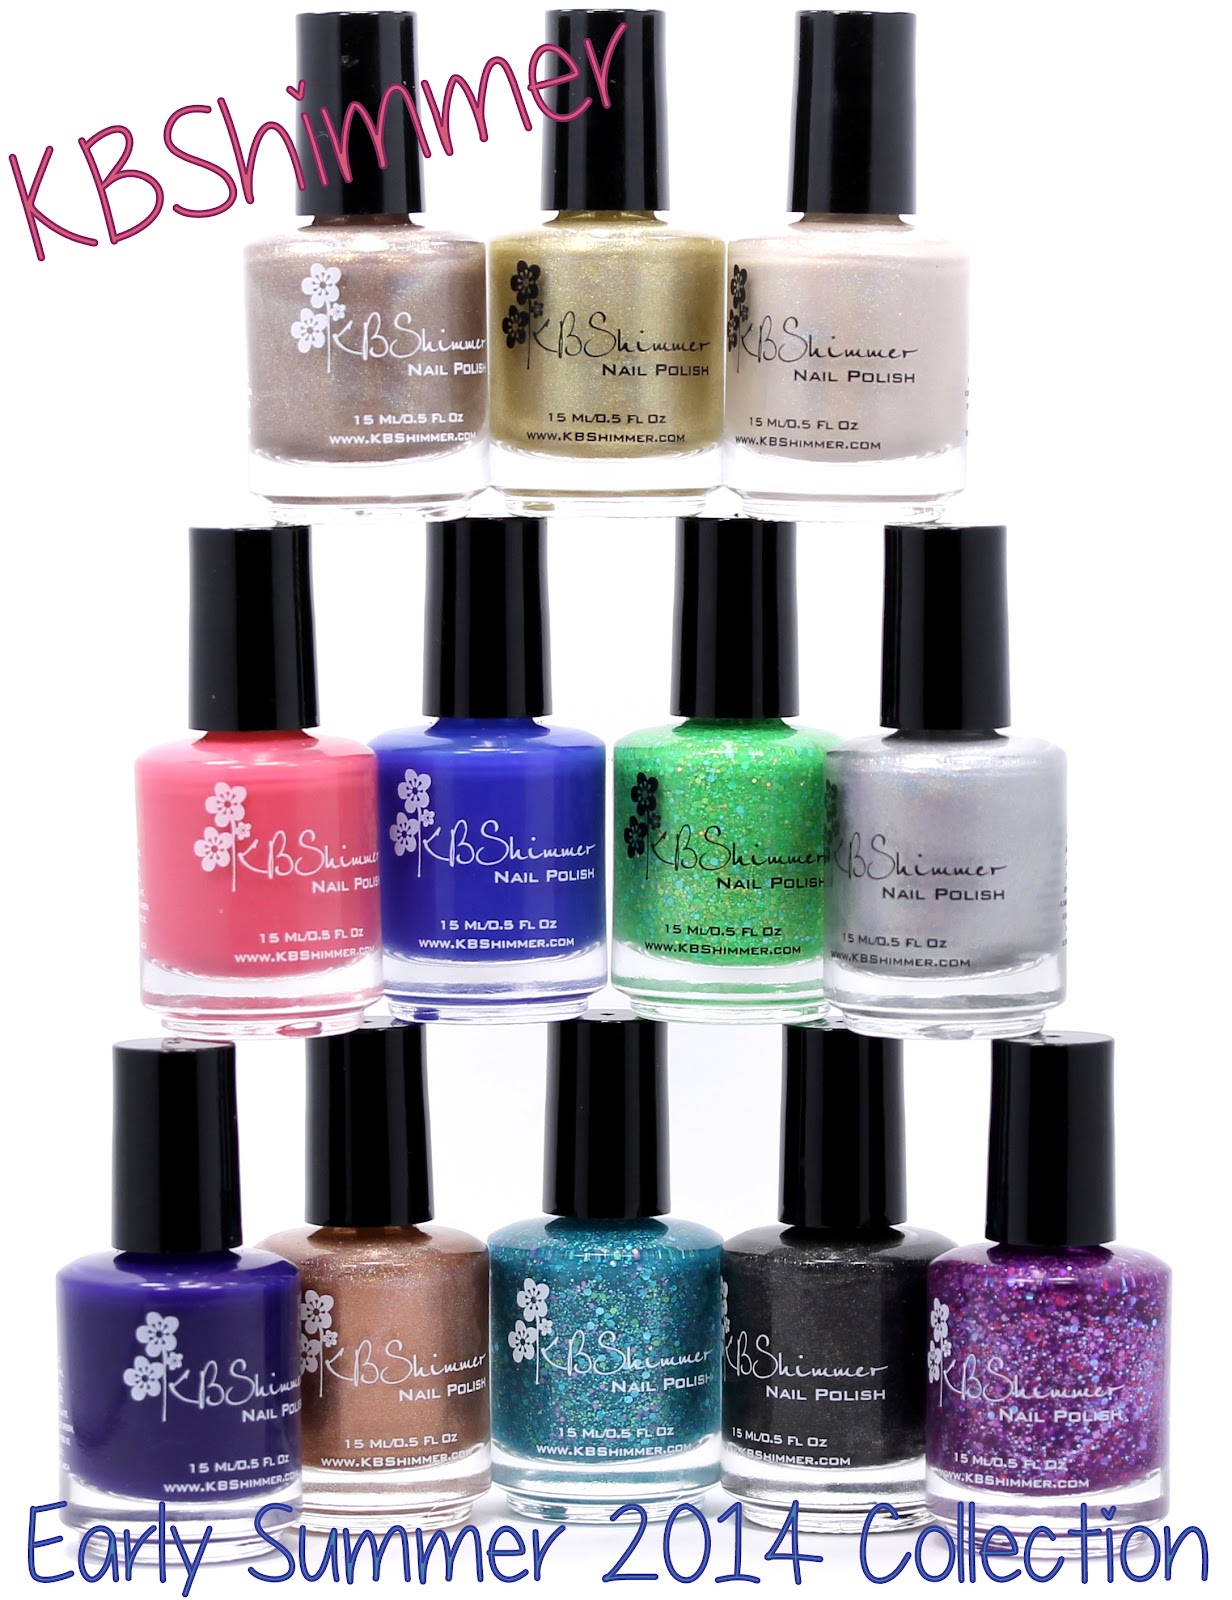 KBShimmer Early Summer 2014 Collection